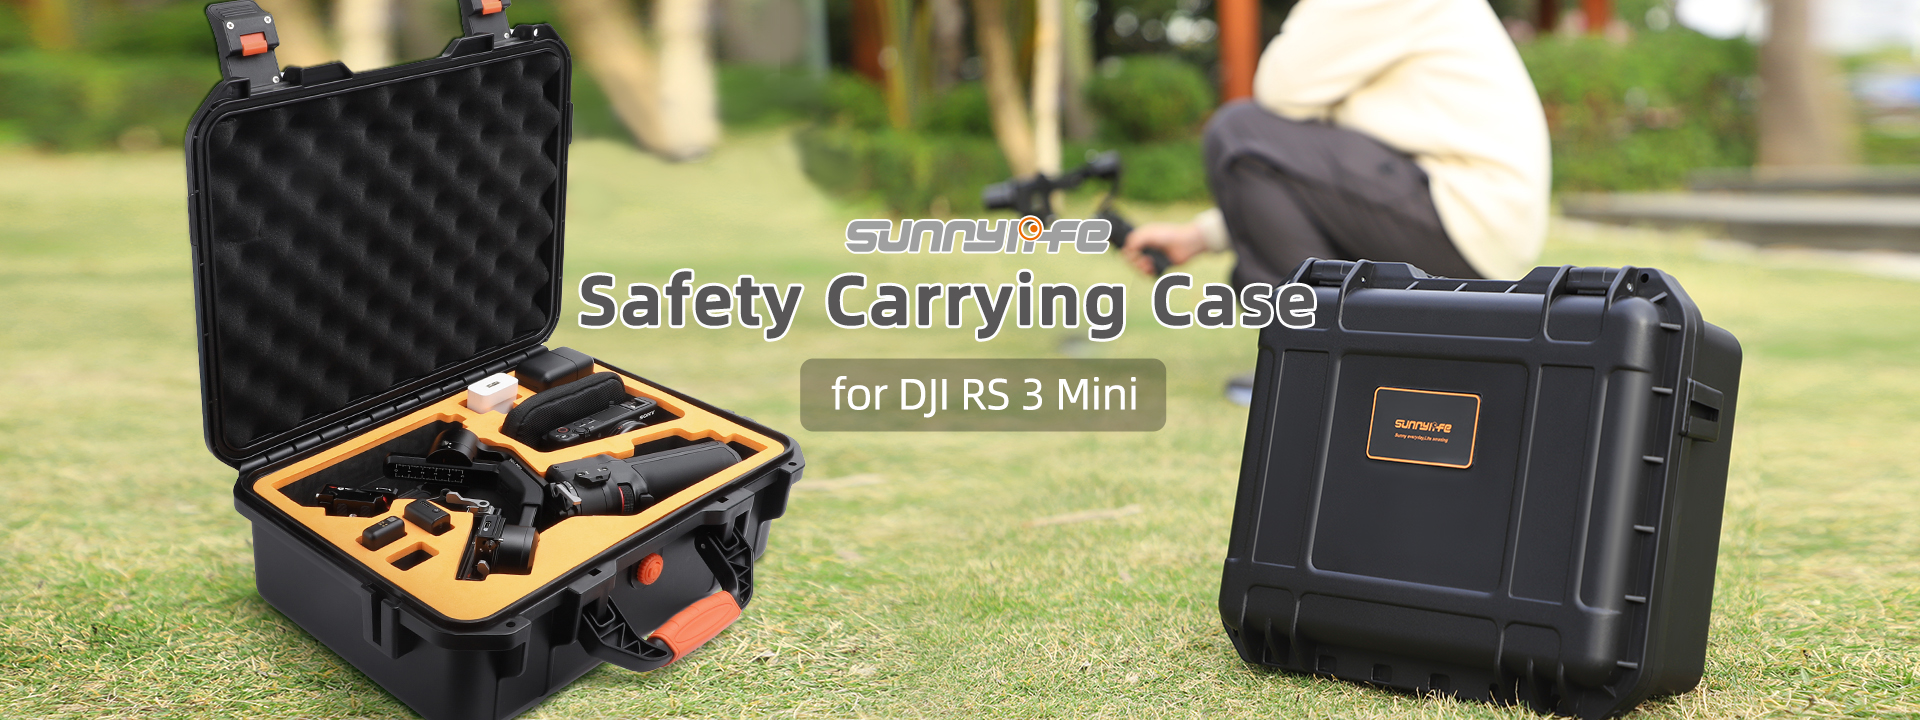 Safety Carrying Case for DJI RS 3 Mini